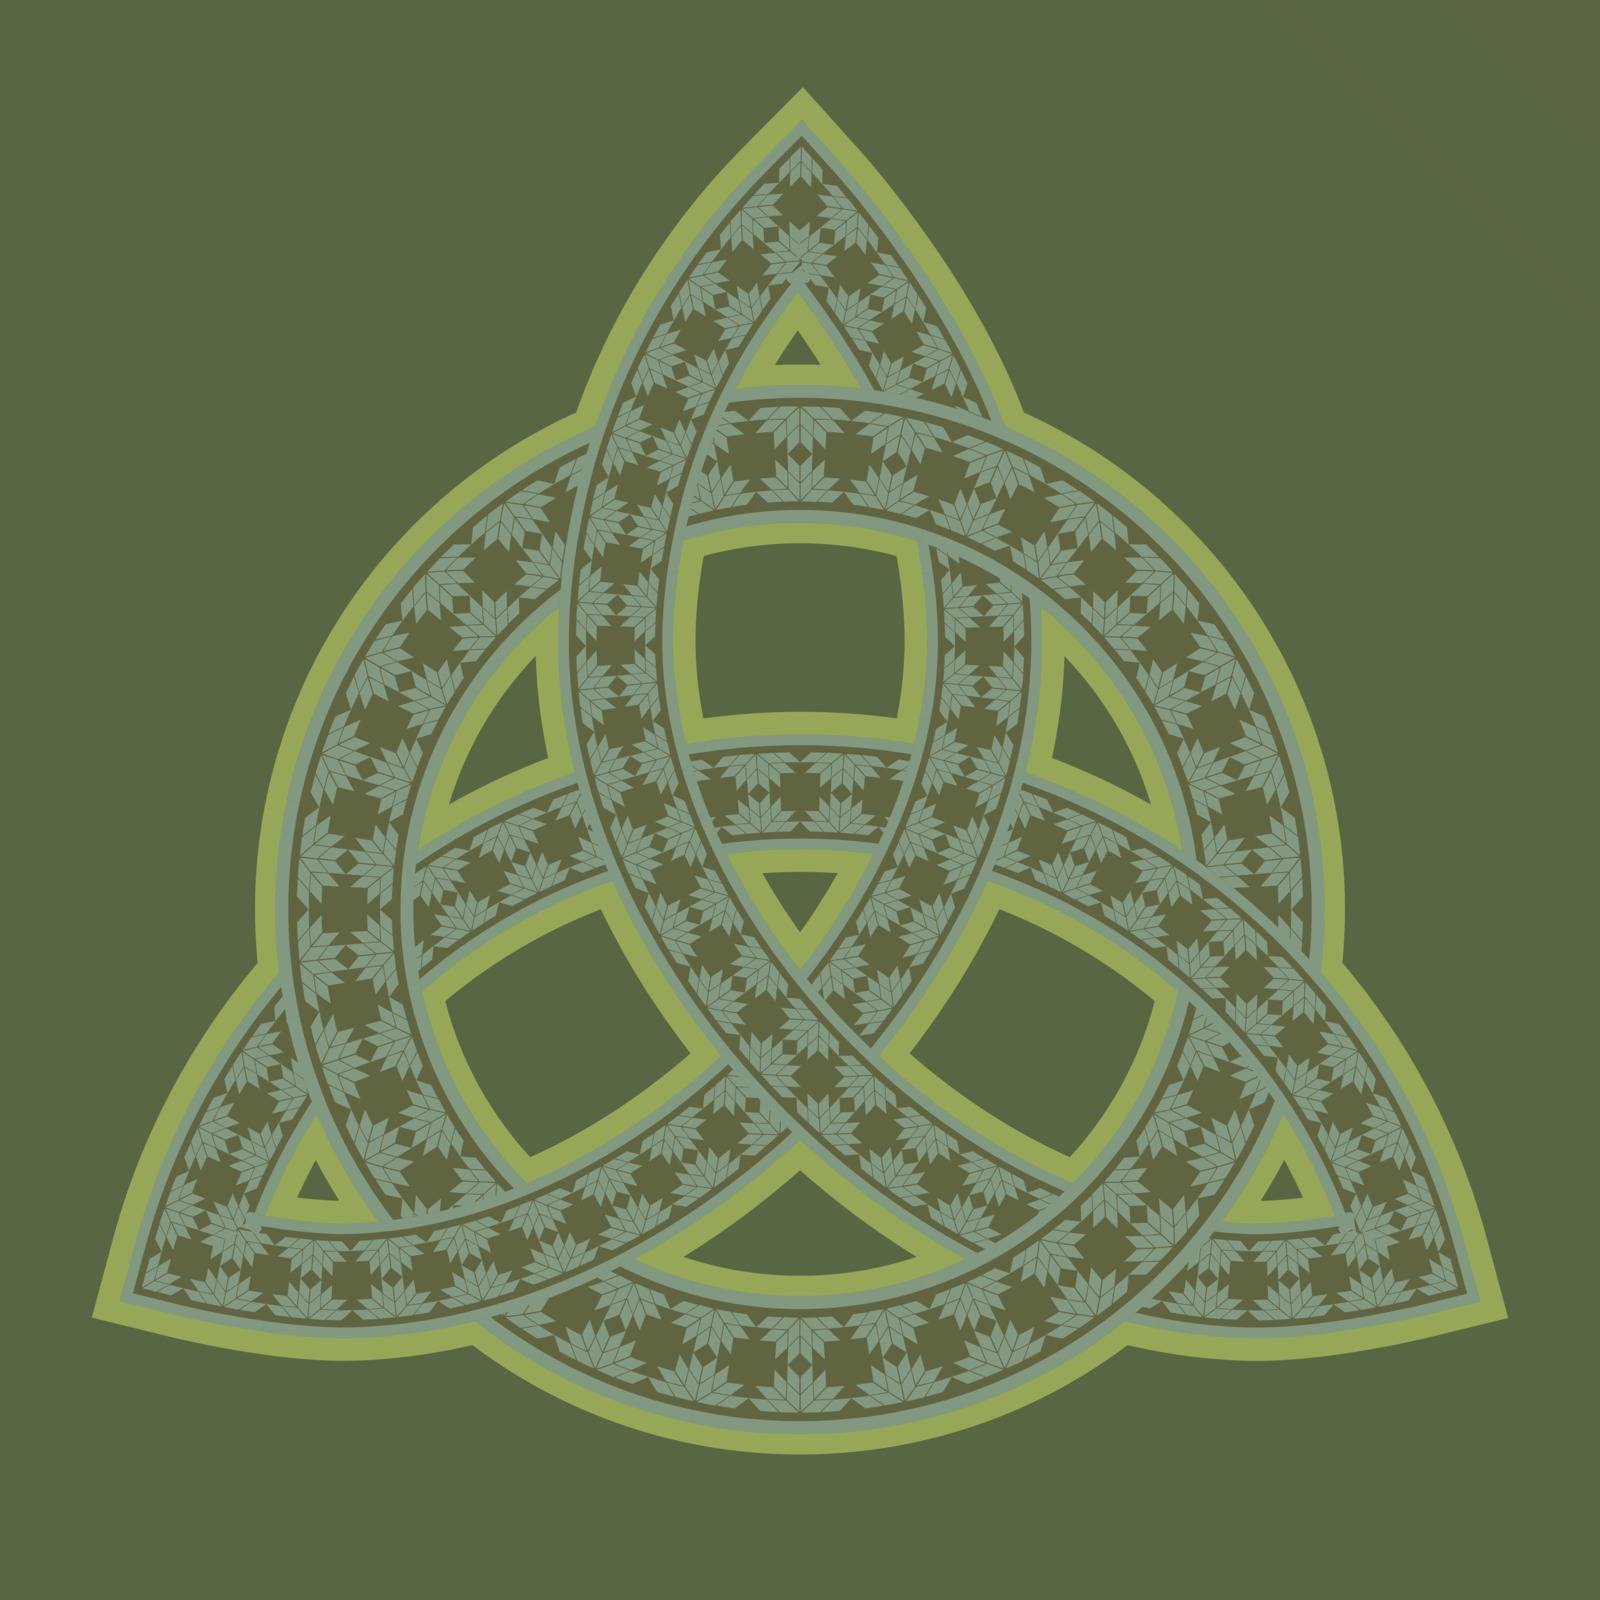 Ornamented celtic pagan symbol triquetra on green background by paranoido